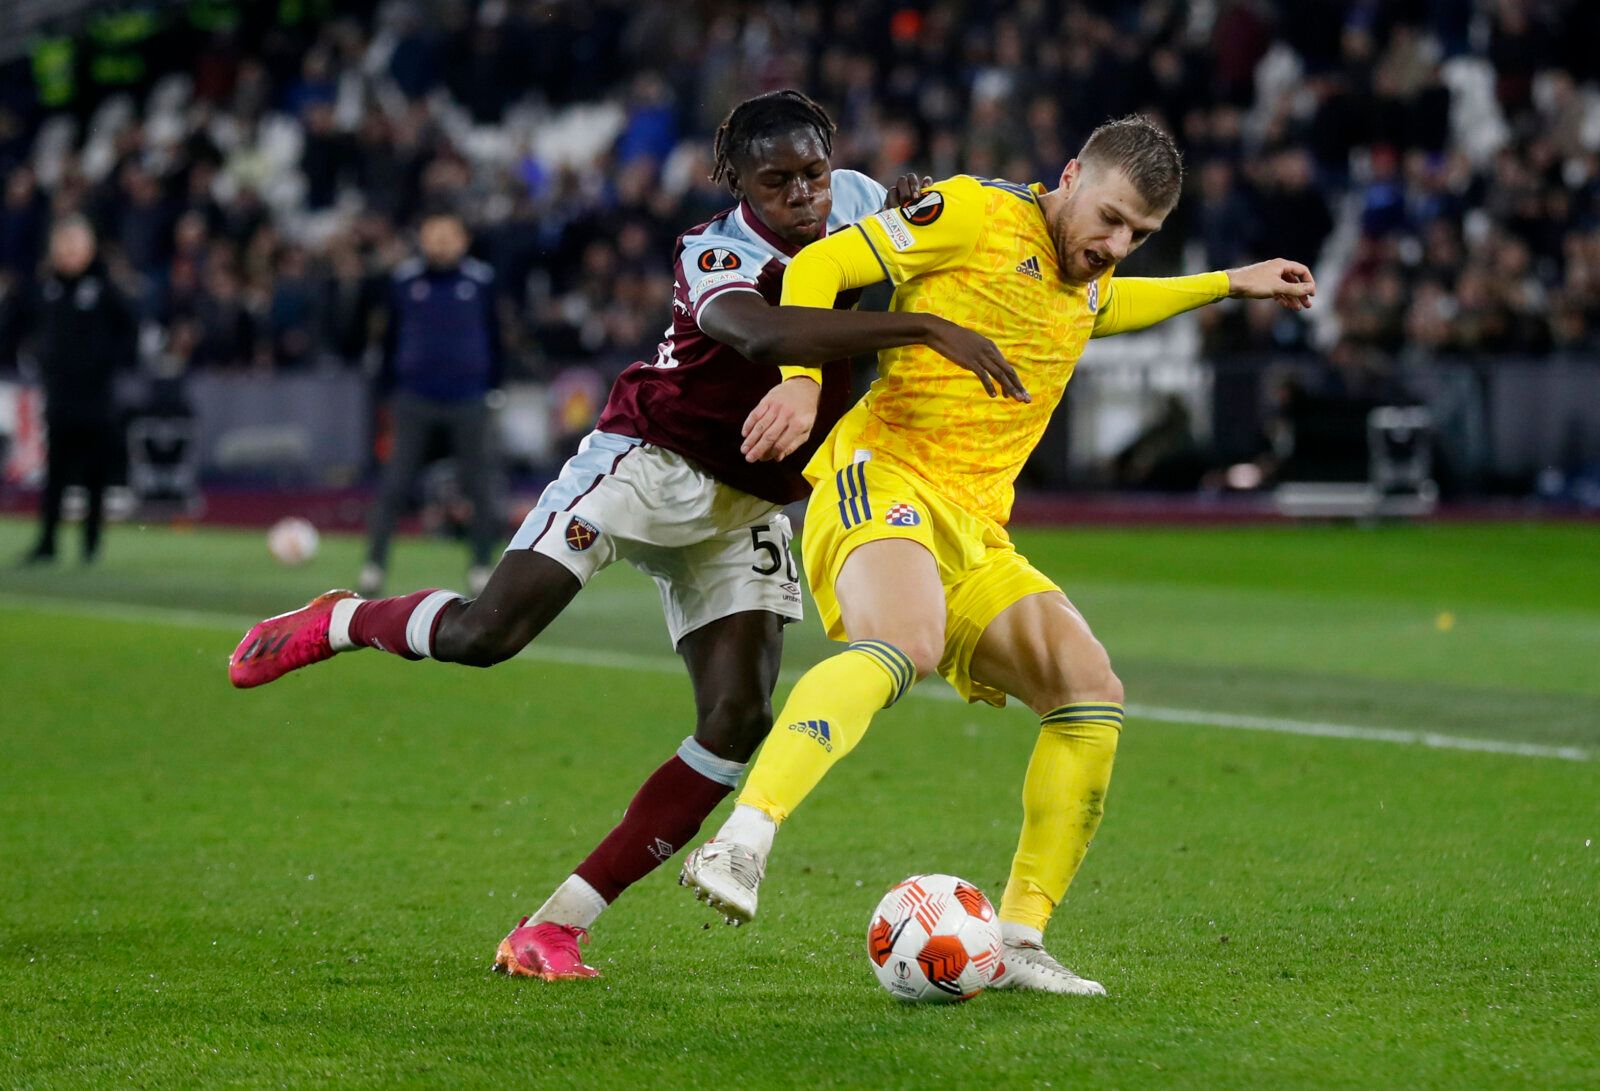 Soccer Football - Europa League - Group H - West Ham United v Dinamo Zagreb - London Stadium, London, Britain - December 9, 2021  Dinamo Zagreb's Stefan Ristovski in action with West Ham United's Manny Longelo Action Images via Reuters/Matthew Childs